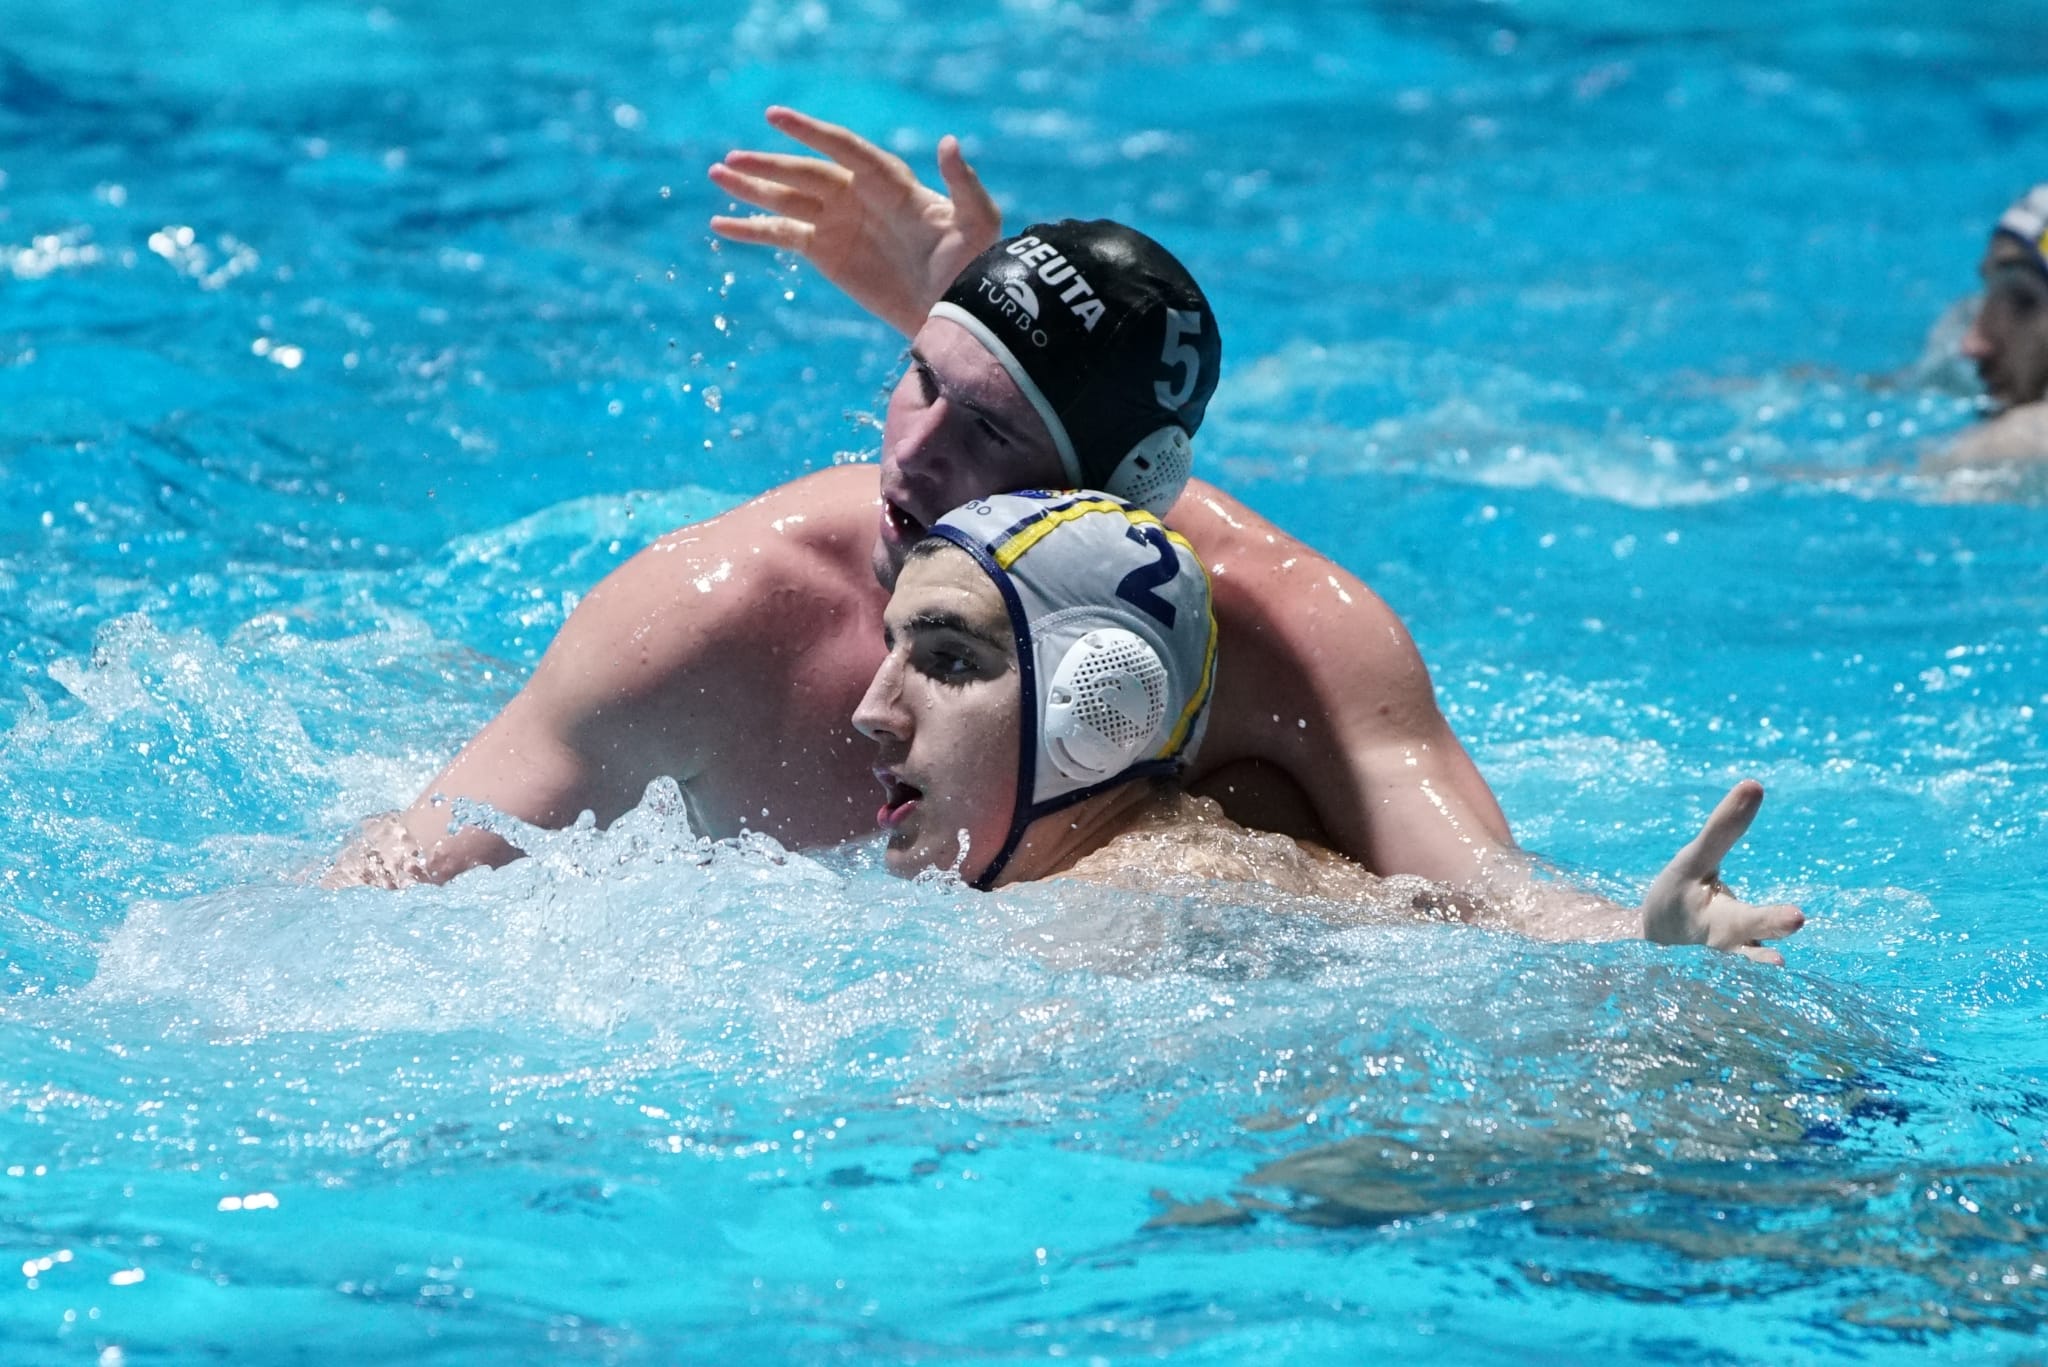 LEWaterpolo J16 (6)